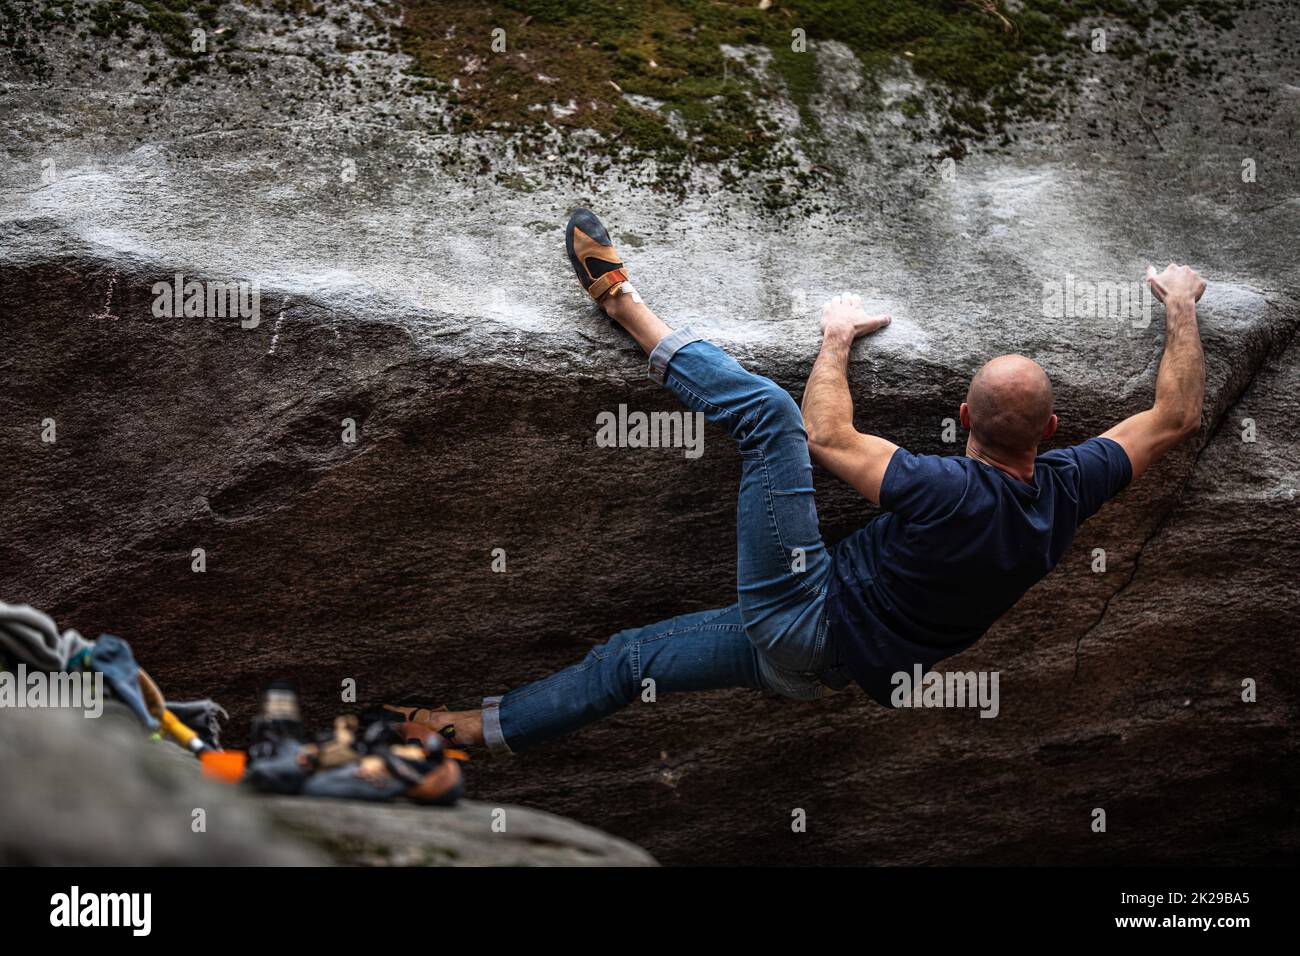 A rock climber climbing on a boulder rock outdoors. Group of friends involved in sports outside. Stock Photo